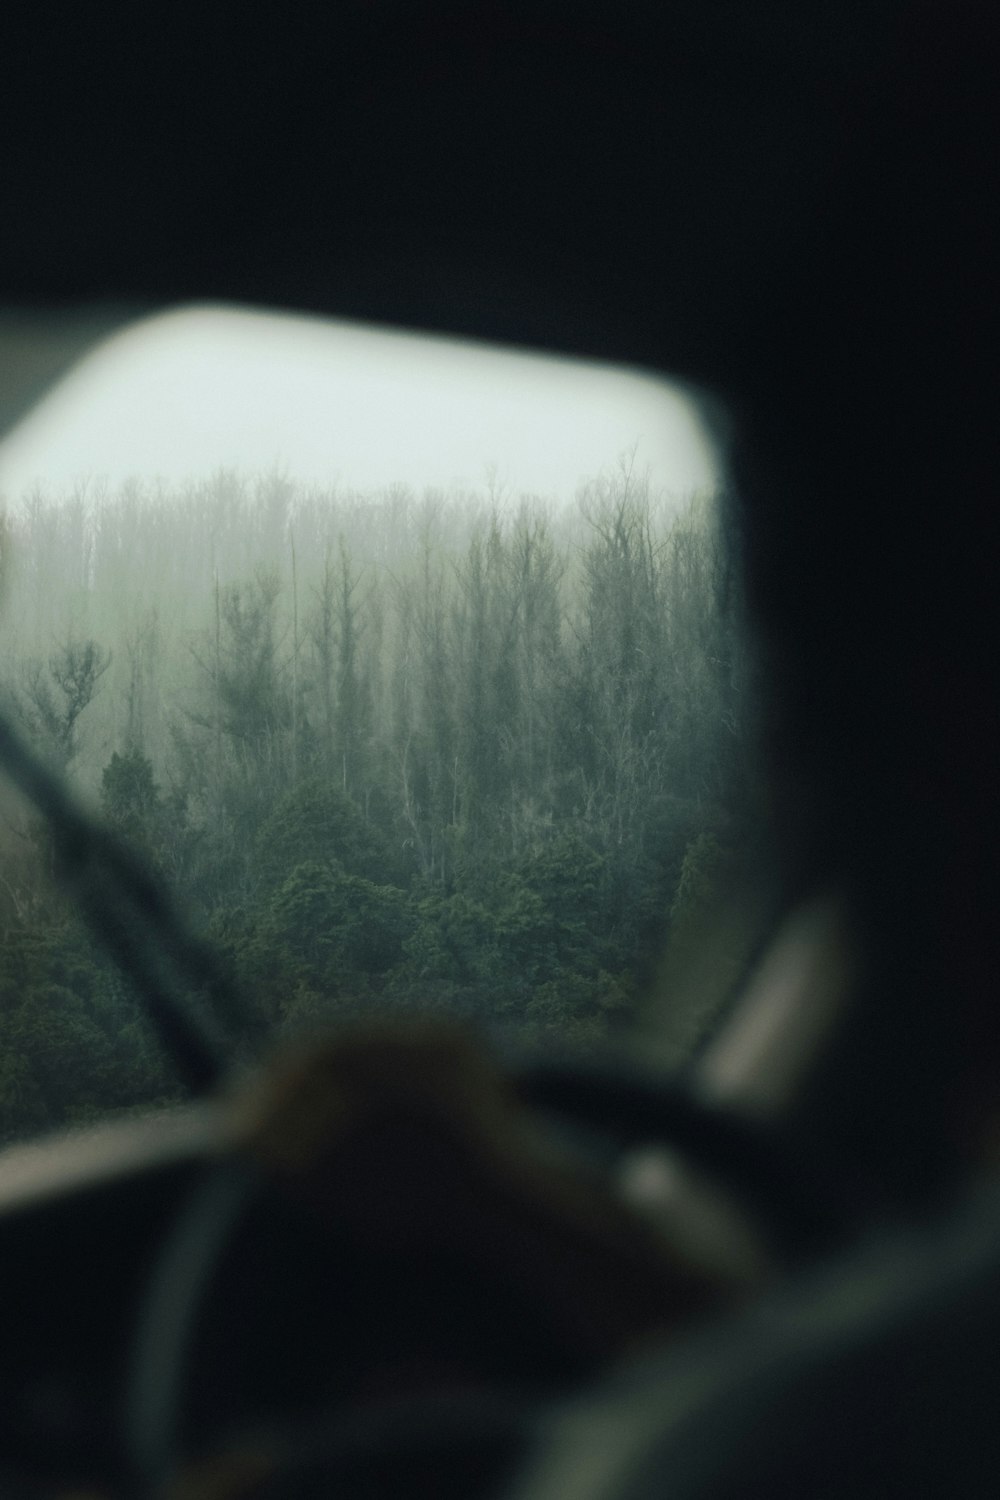 a view of a forest from inside a vehicle